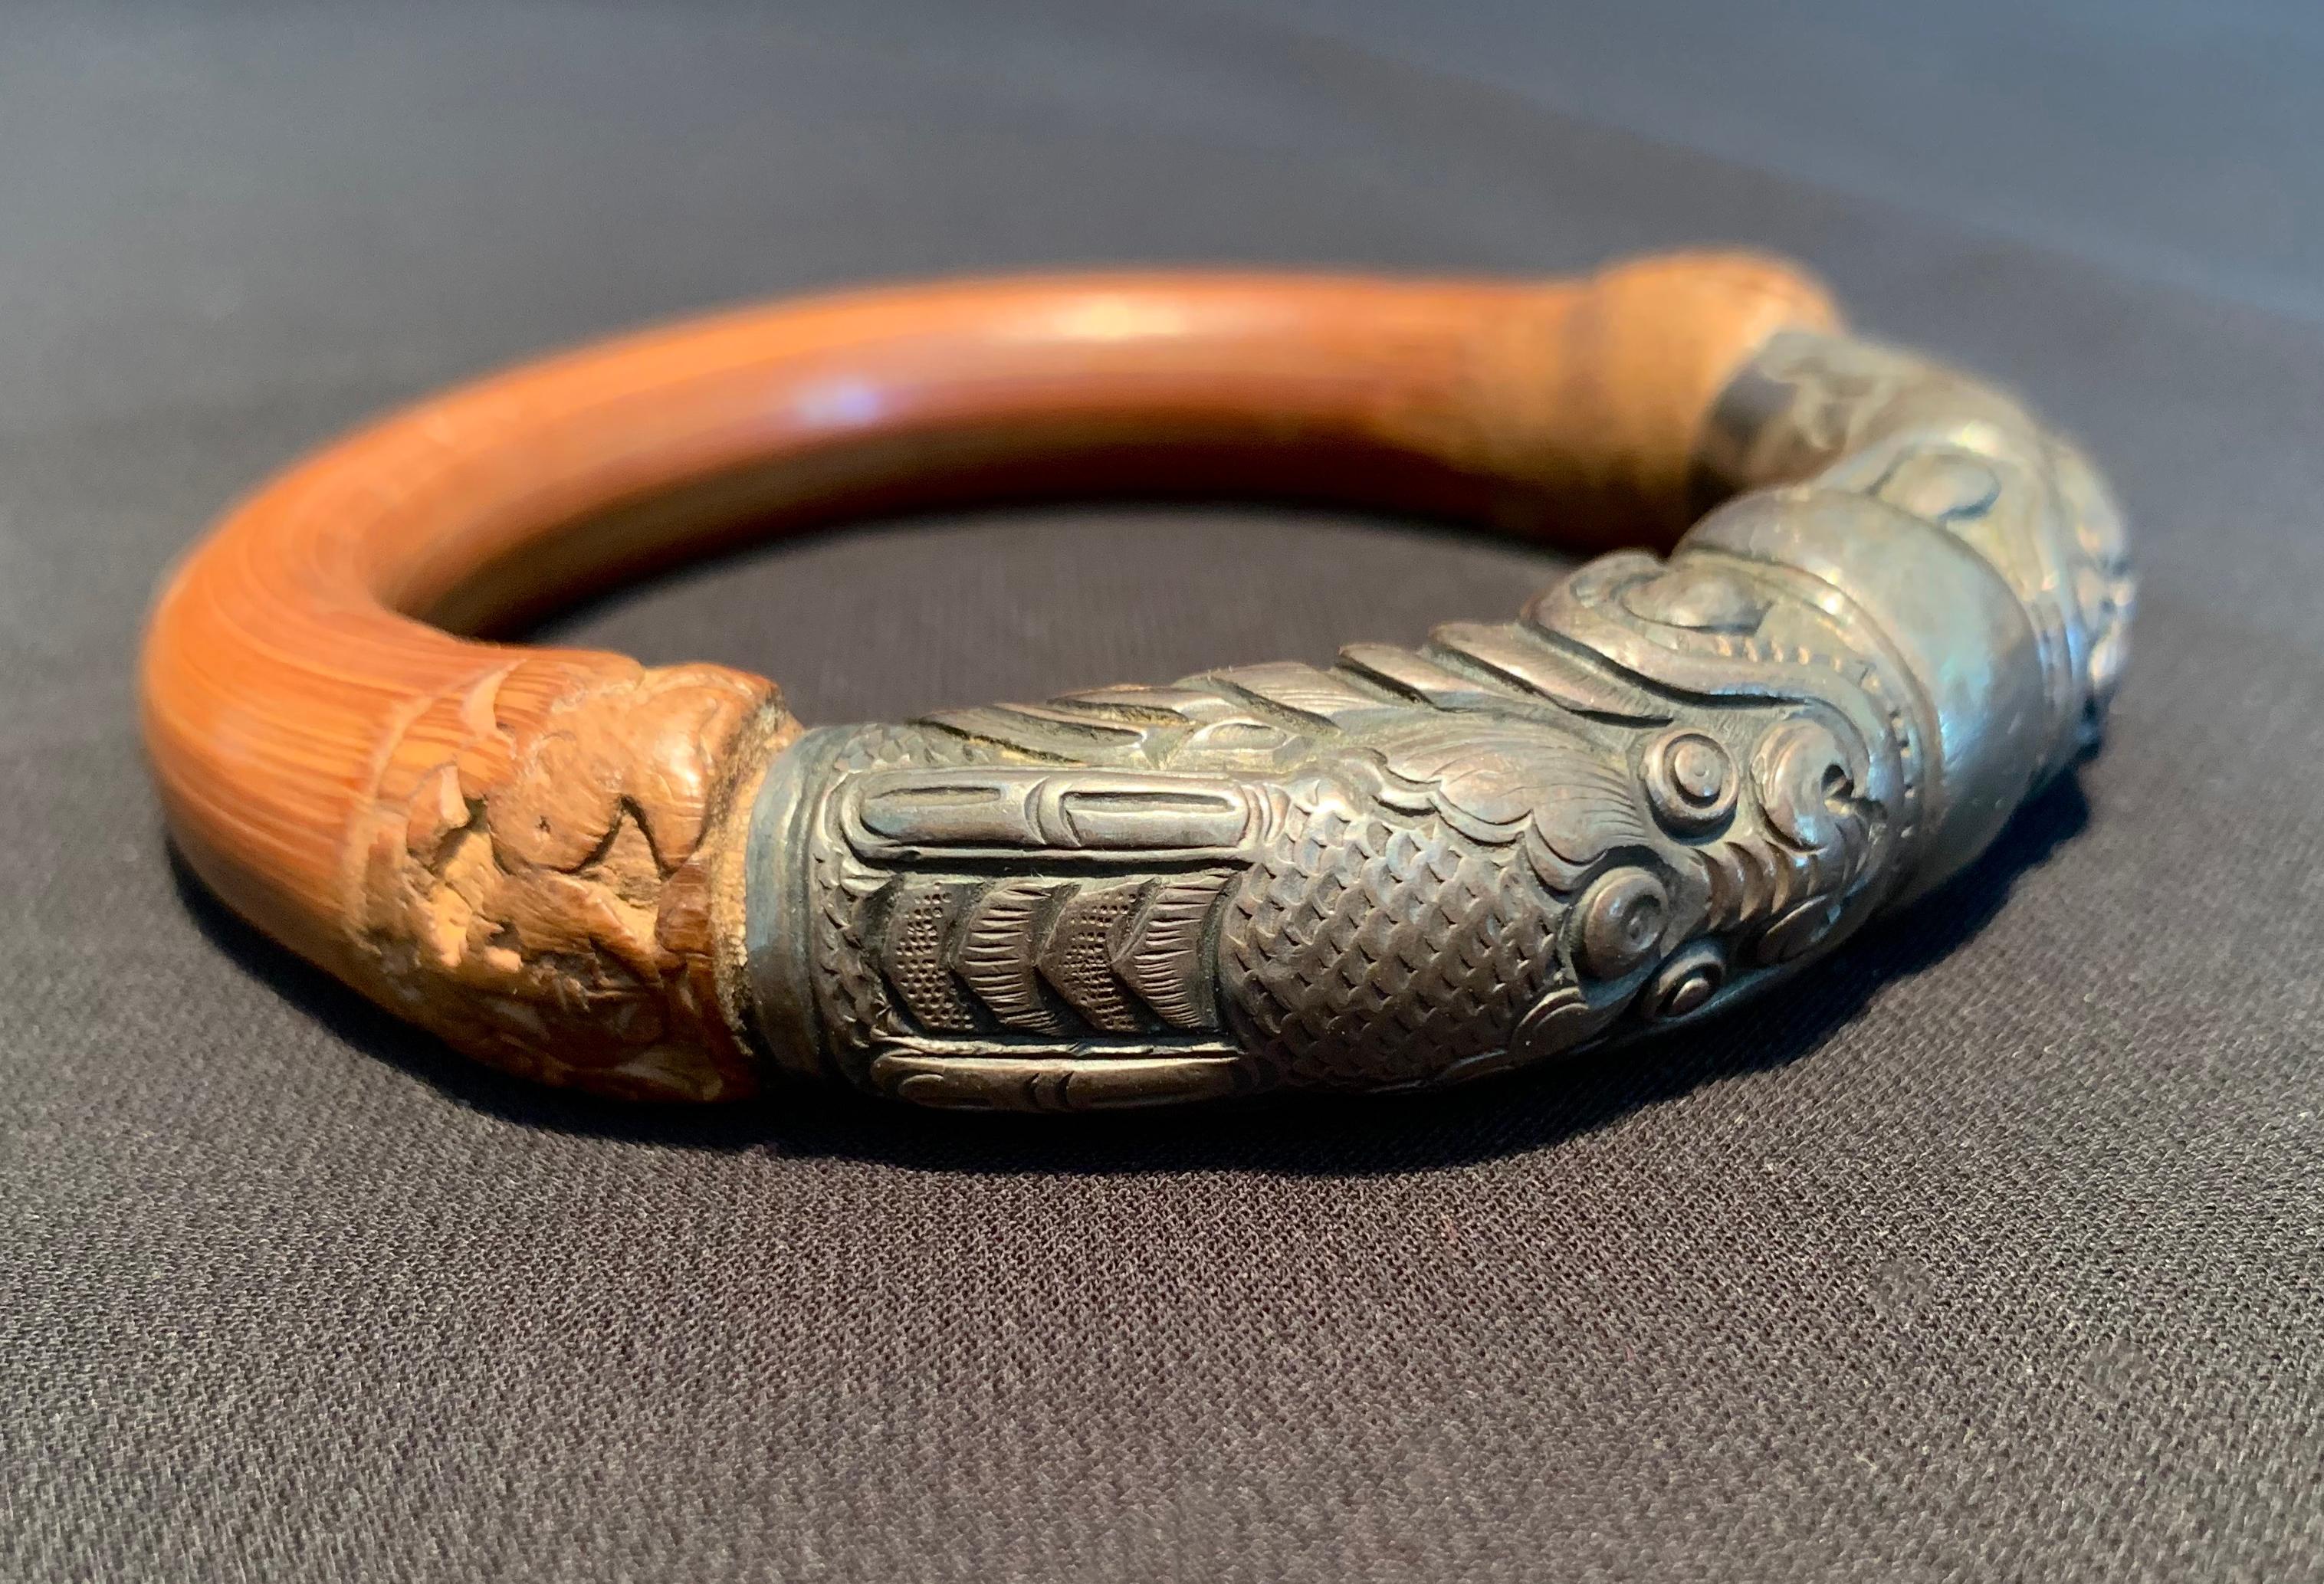 This antique Chinese silver and rattan bamboo bracelet features a double headed dragon holding a globe. It required intricate detail and skilled craftsmanship which would have taken a great number of hours to complete. 

Dimensions: Inner